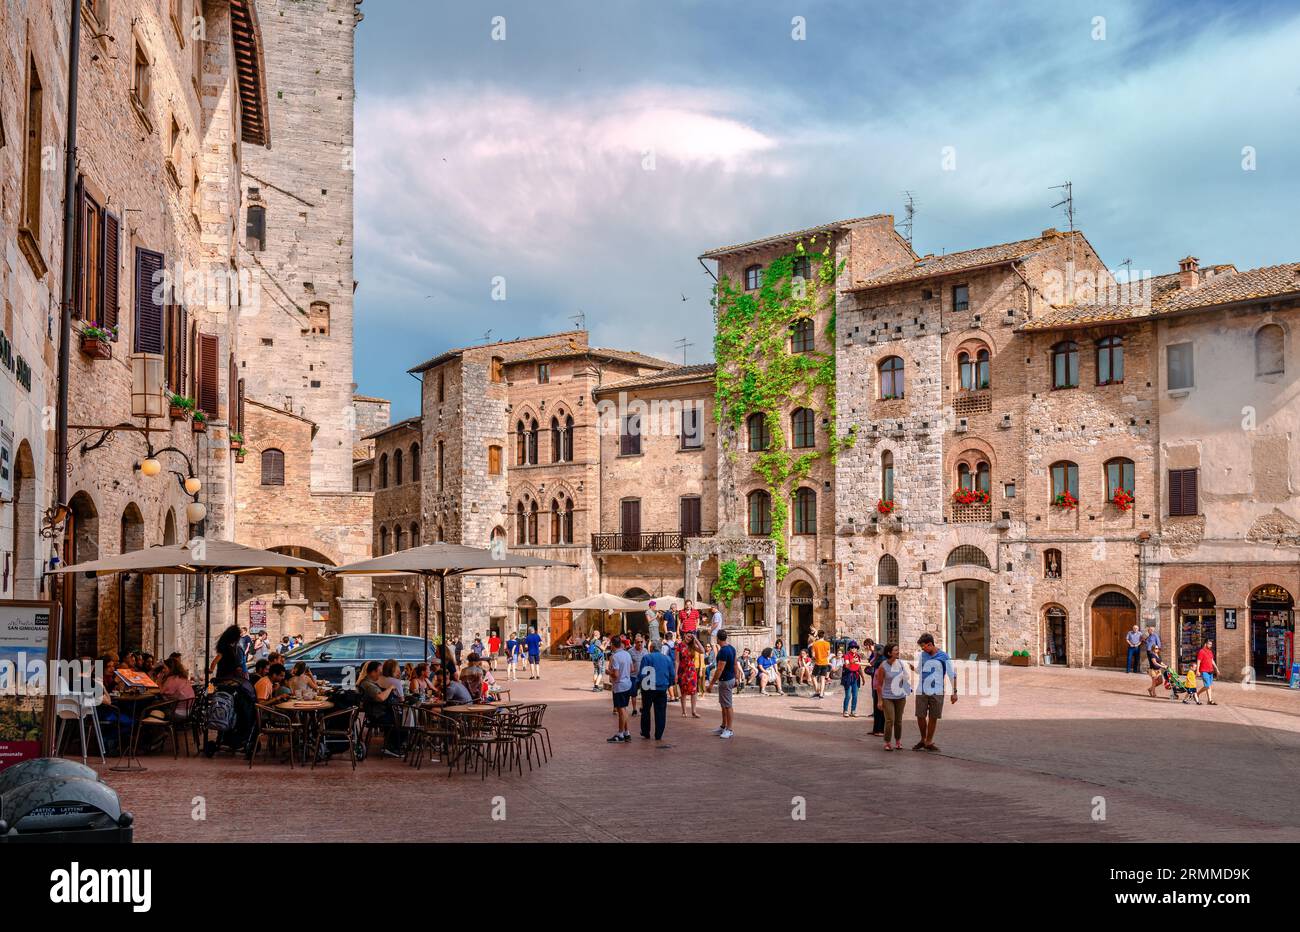 Piazza della Cisterna in San Gimignano, Italy. Built in 1287, it is  surrounded by houses and towers. Stock Photo